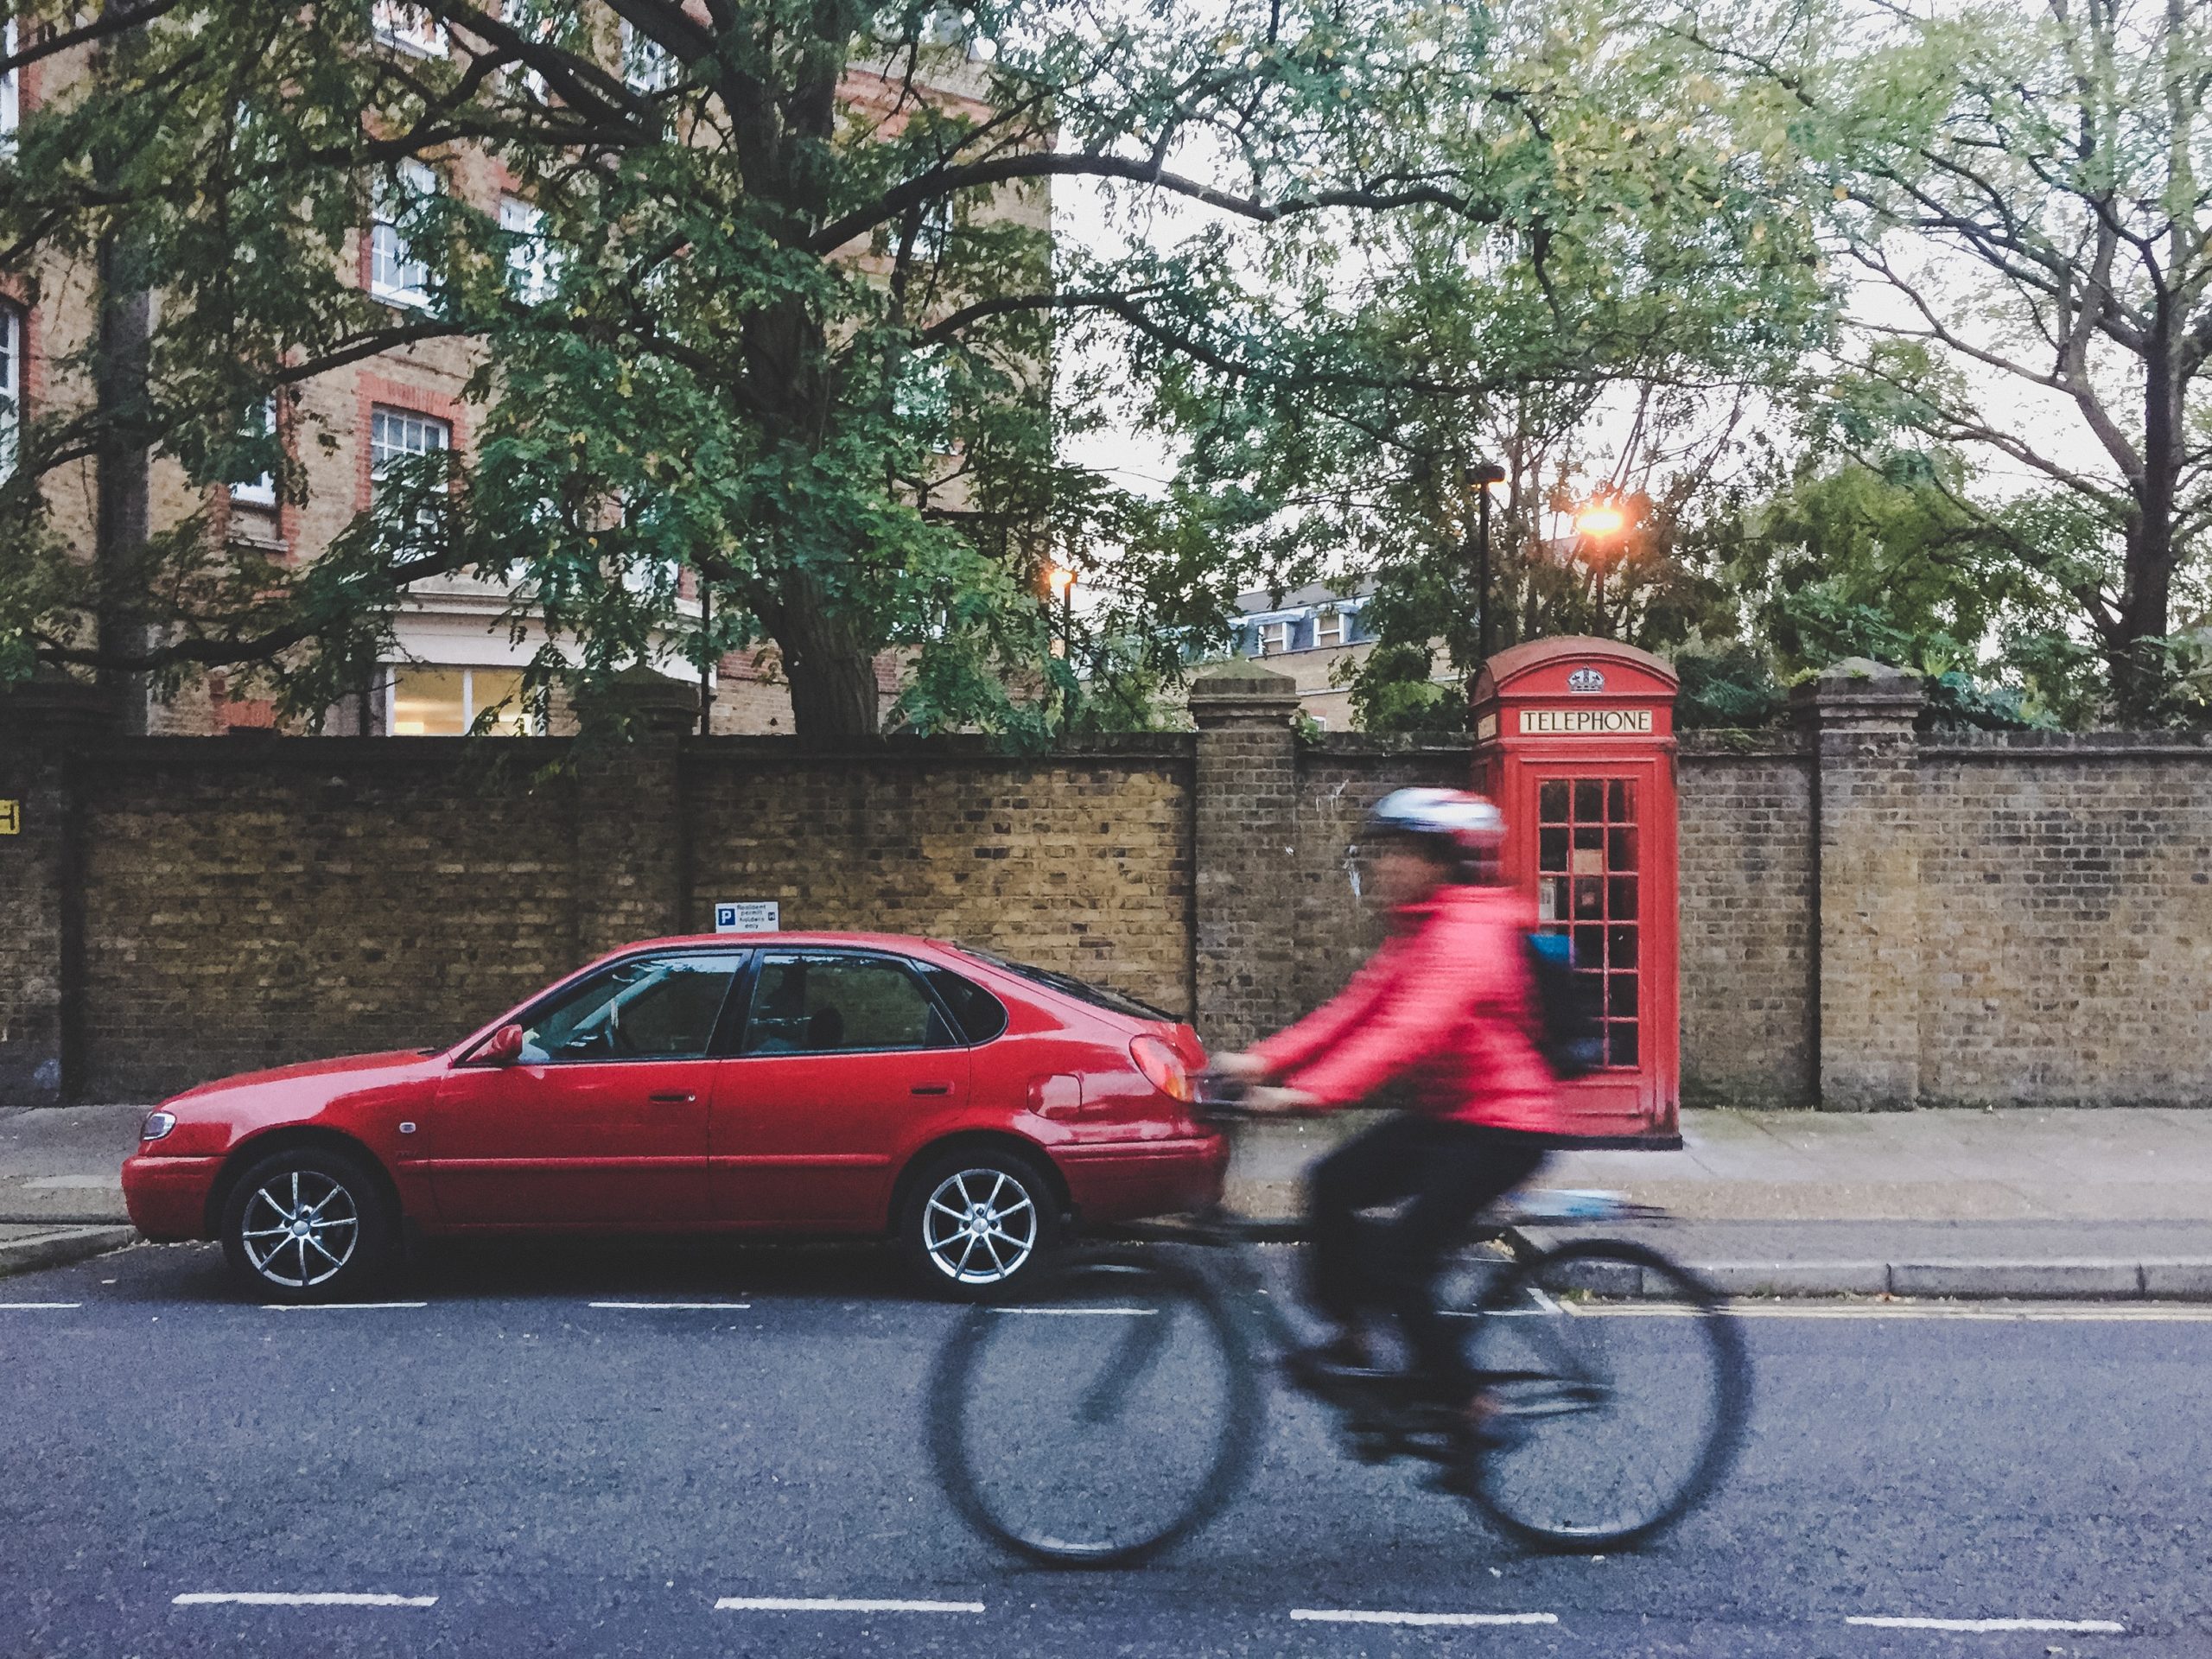 A cyclist in motion on the road, with a parked car and telephone box in the background